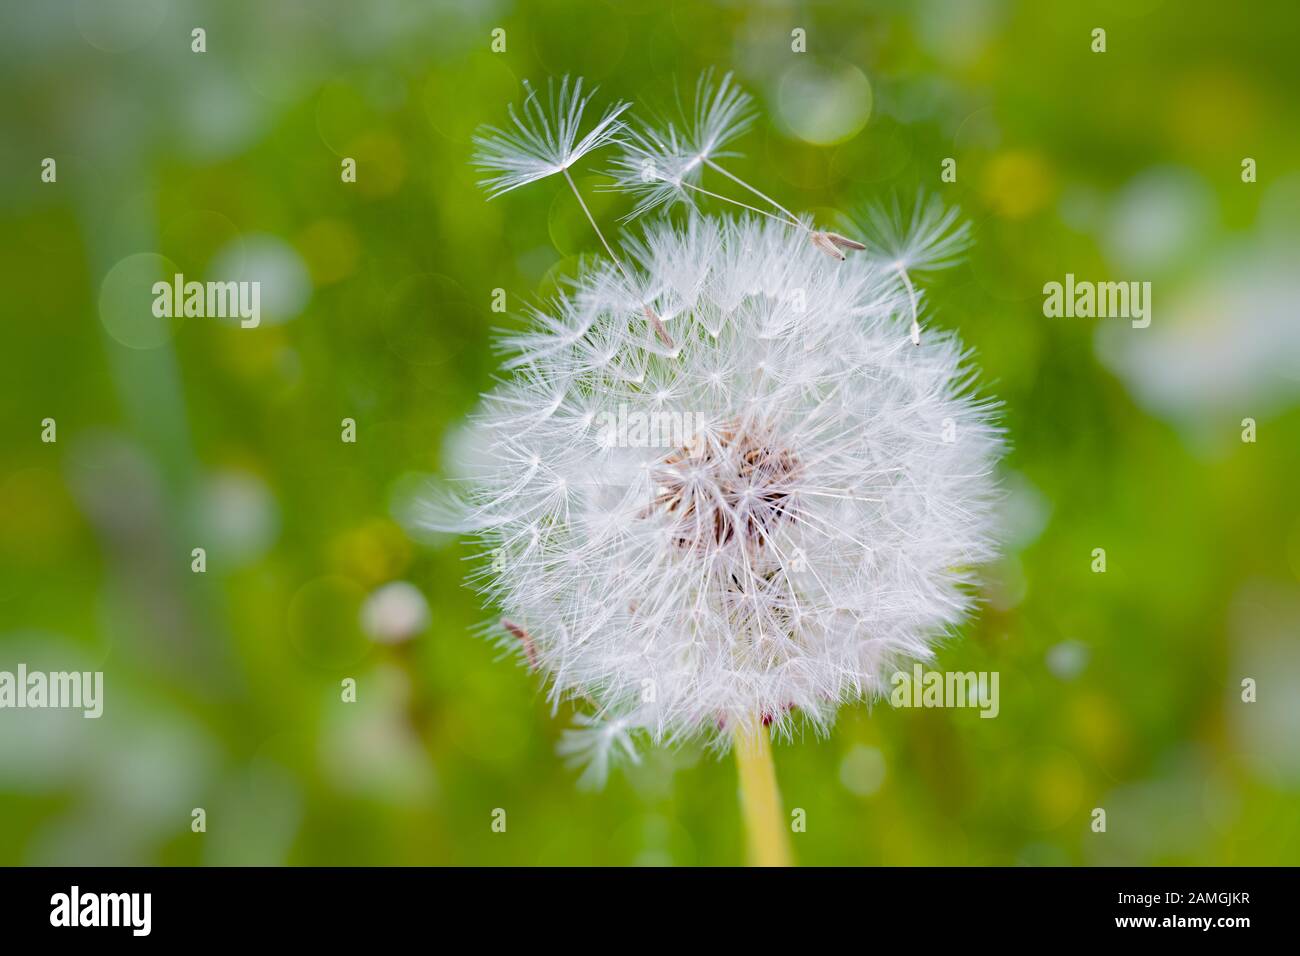 Dandelions gone to seed in a springtime lawn. Stock Photo